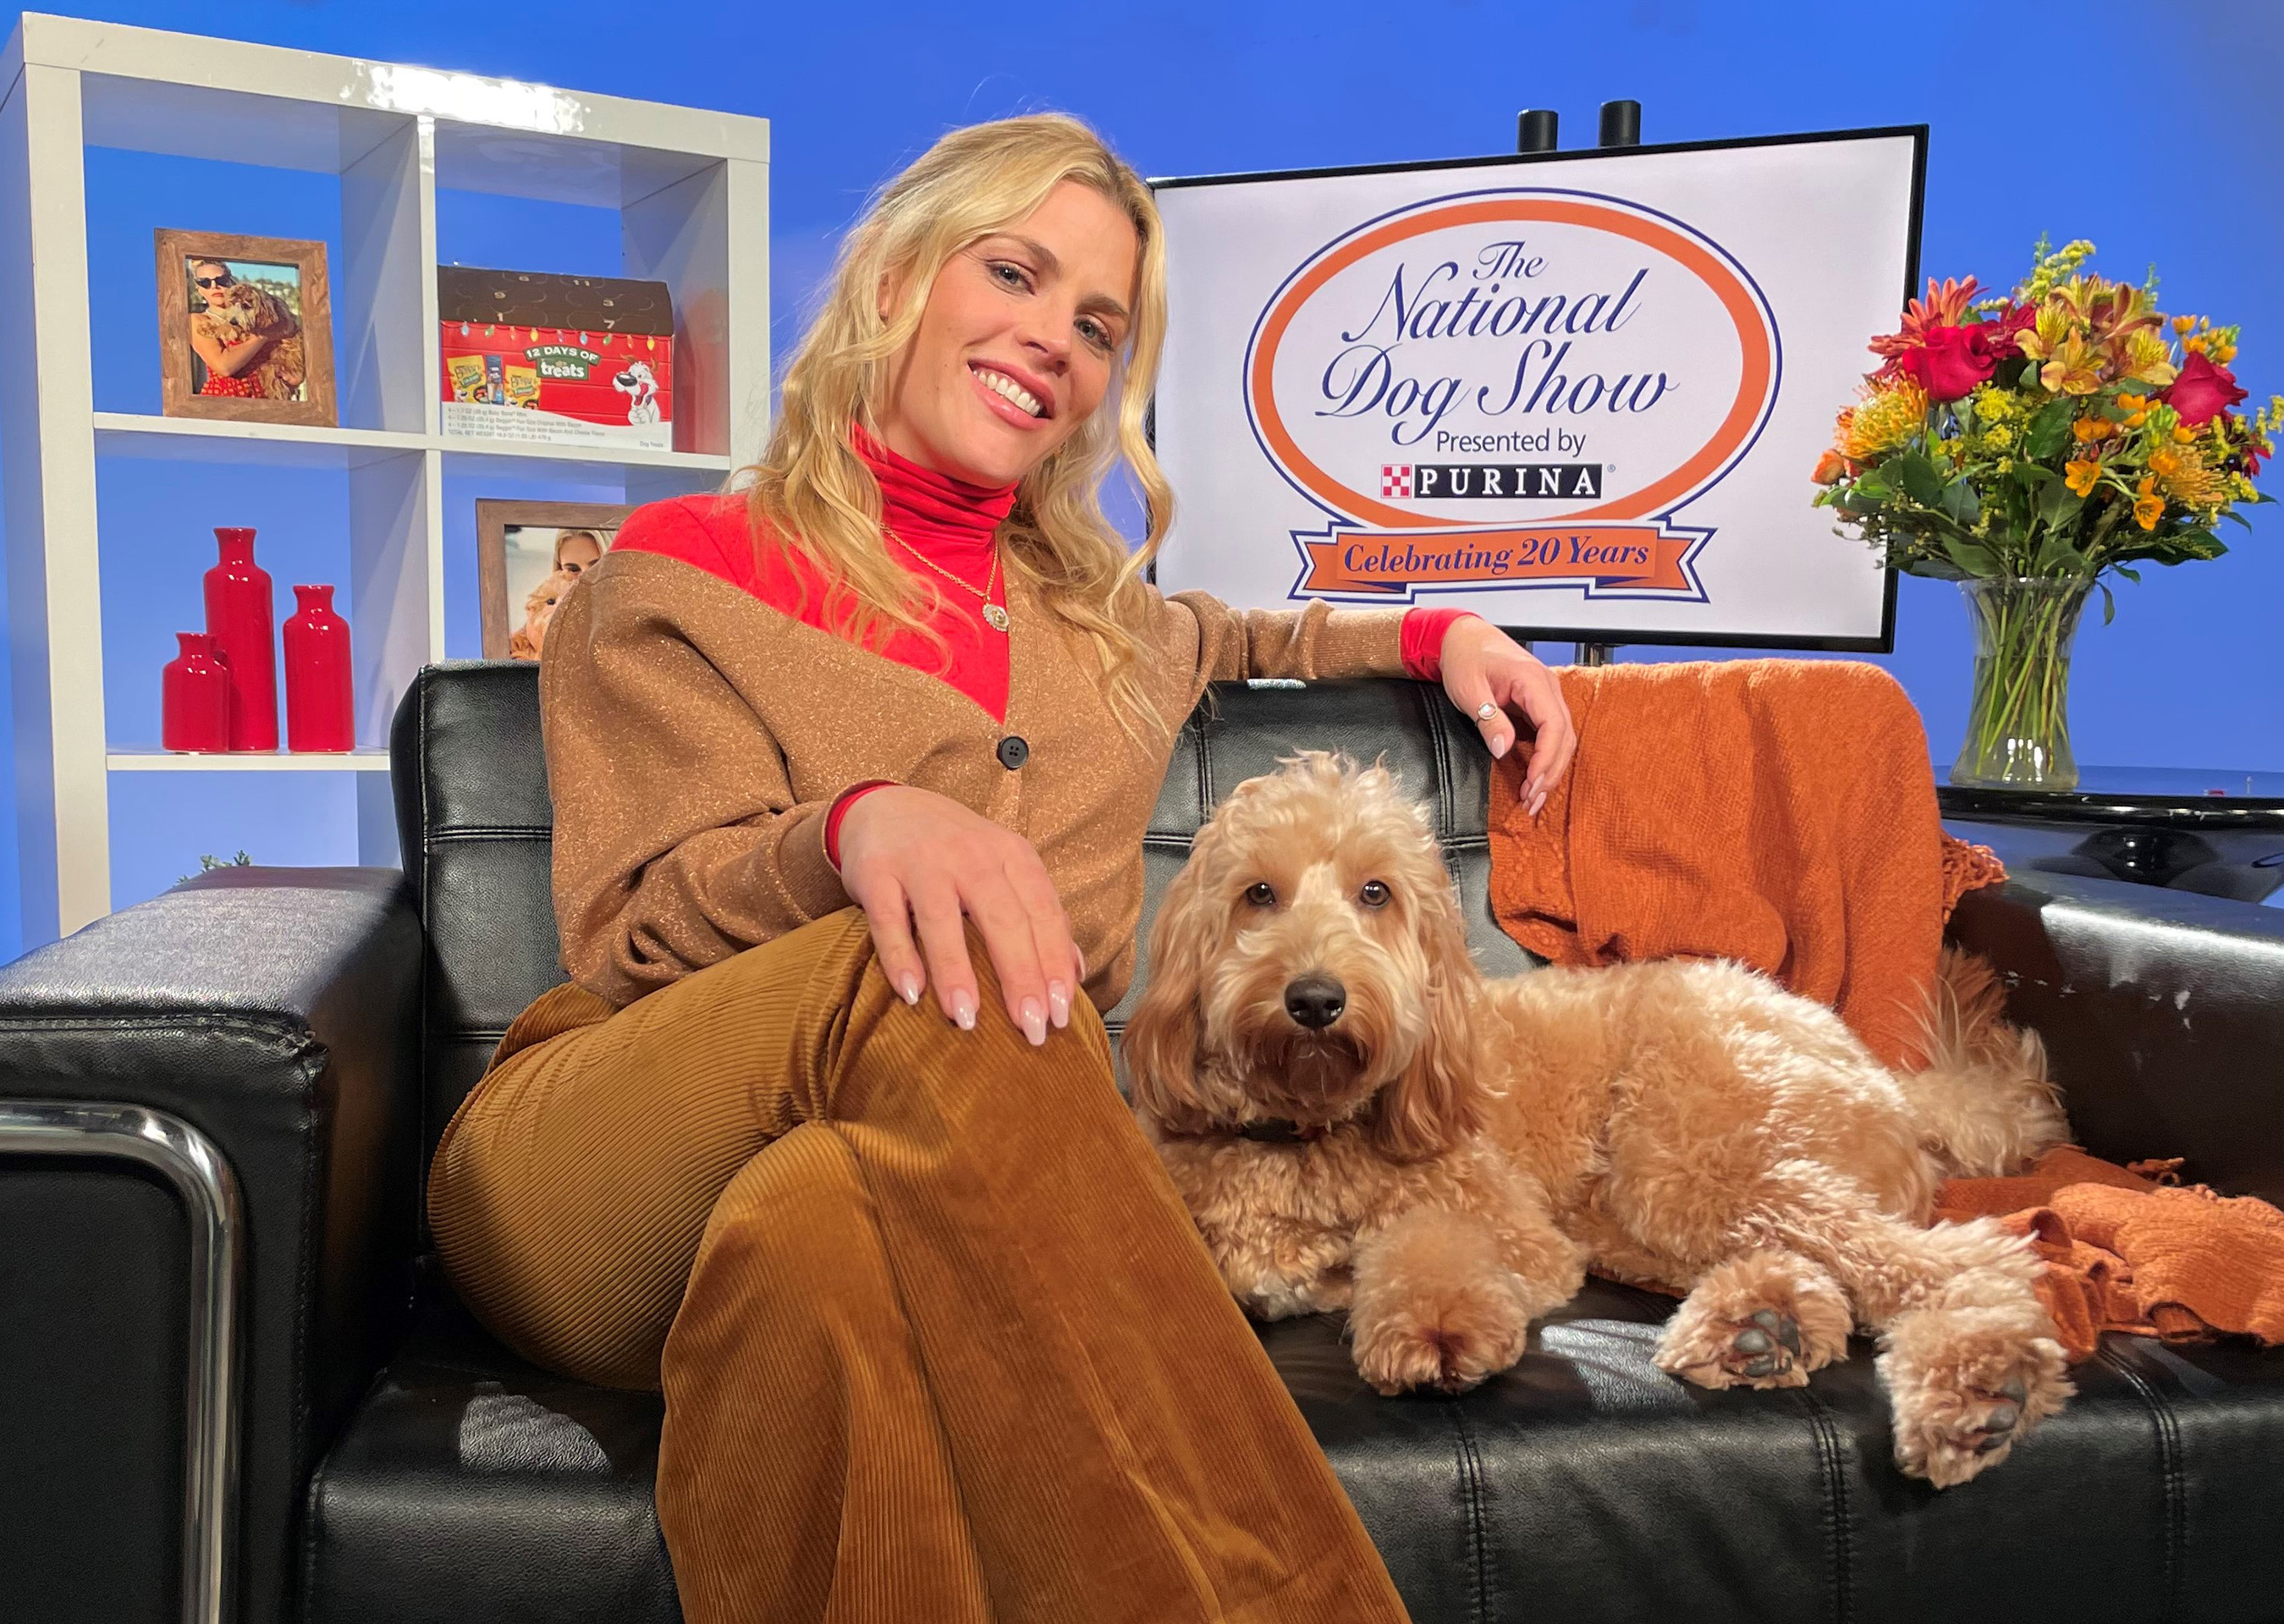 “Gina and I love The National Dog Show because it highlights pets and people winning and growing together,” said actress, author, podcast host and pet enthusiast Busy Philipps.